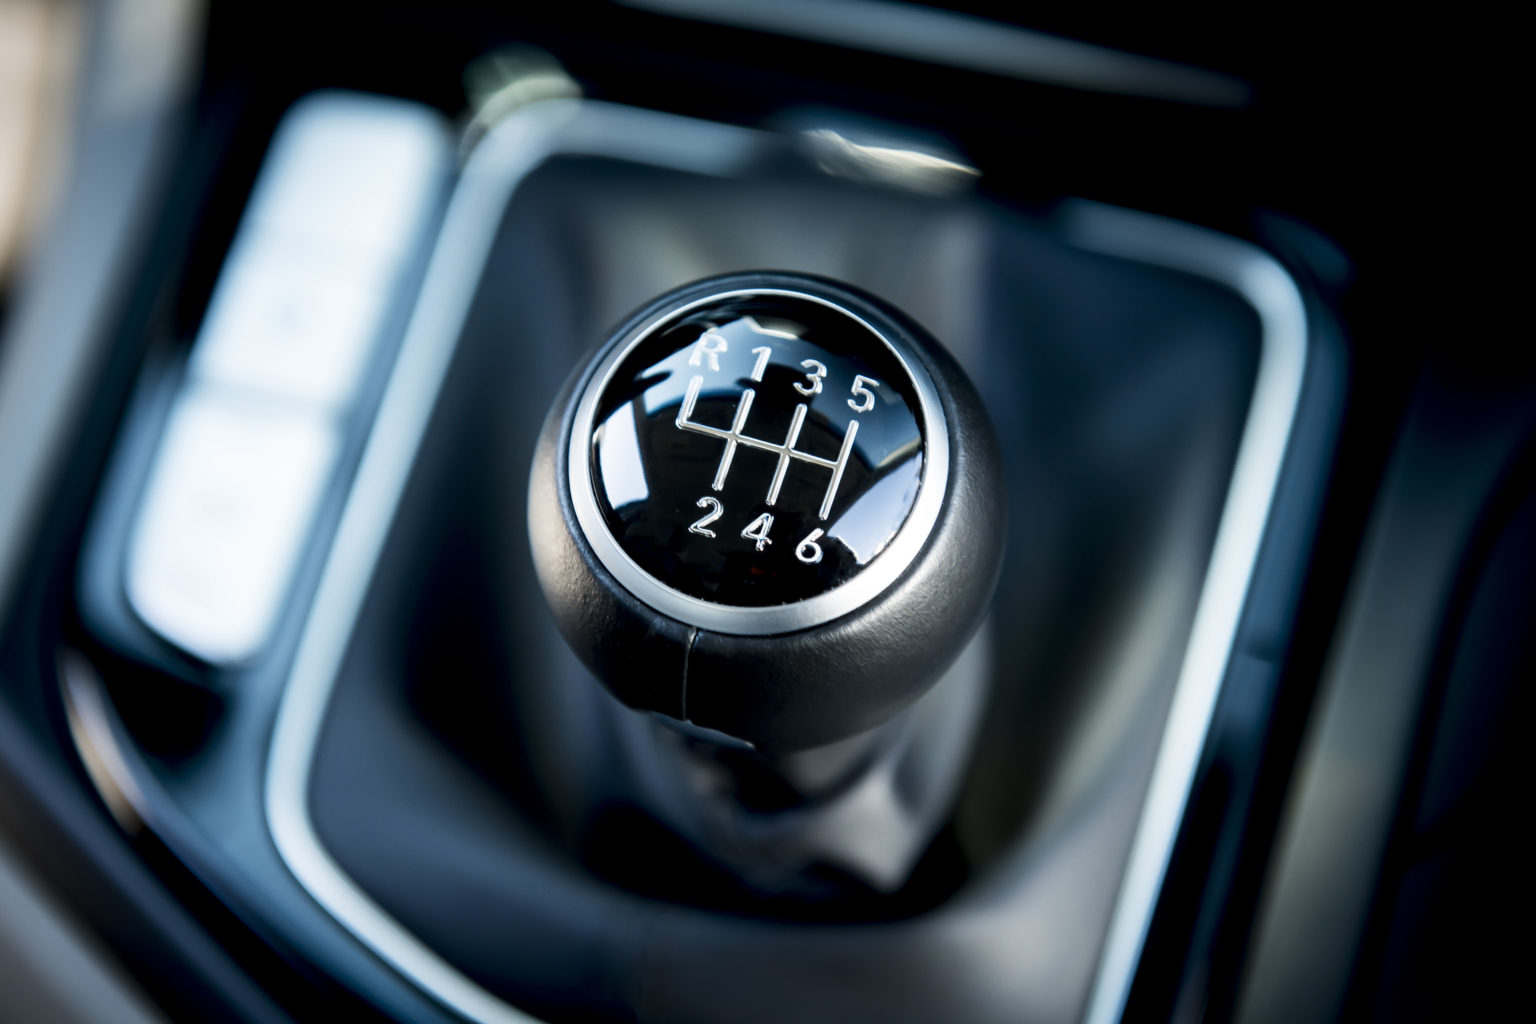 The Genesis G70 can be equipped with a six-speed manual transmission.